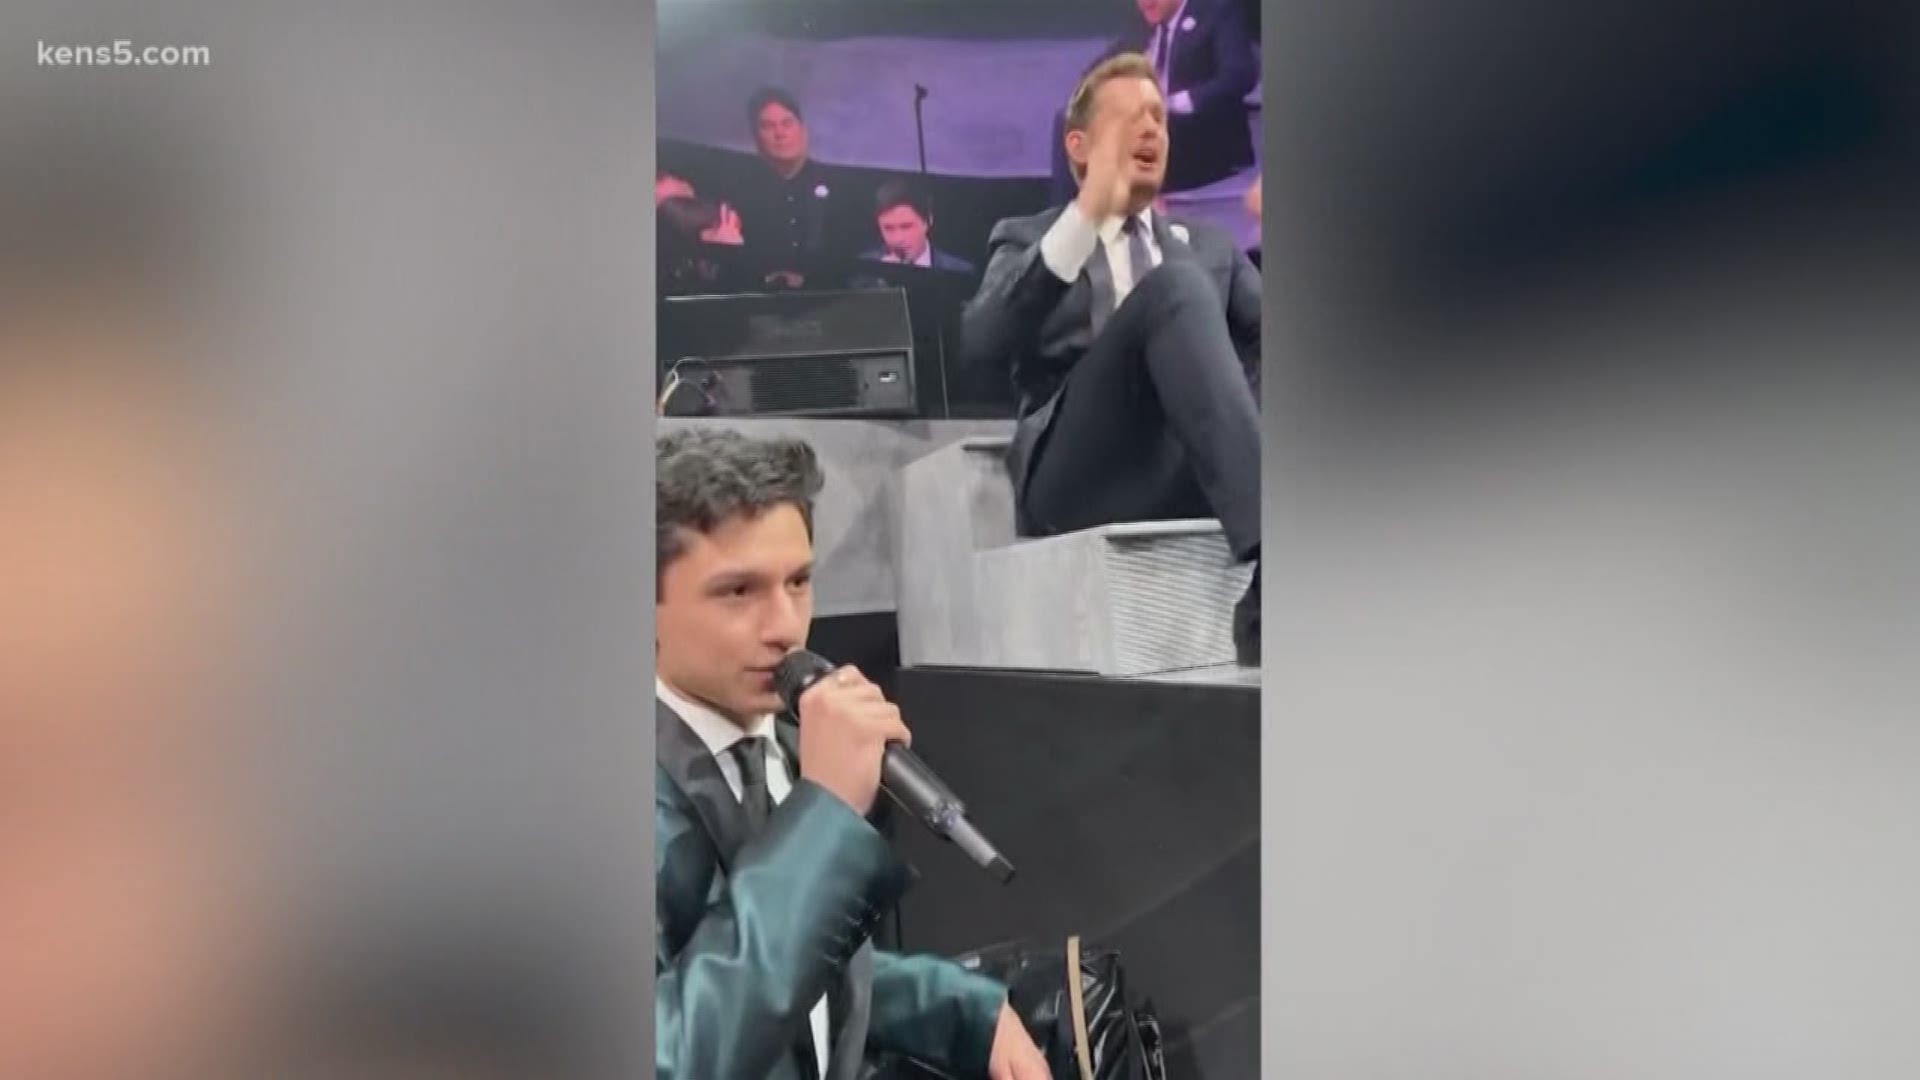 In a contest involving hundreds of San Antonio singers, one teen was lucky enough to be picked to duet with a huge star at the AT&T Center.